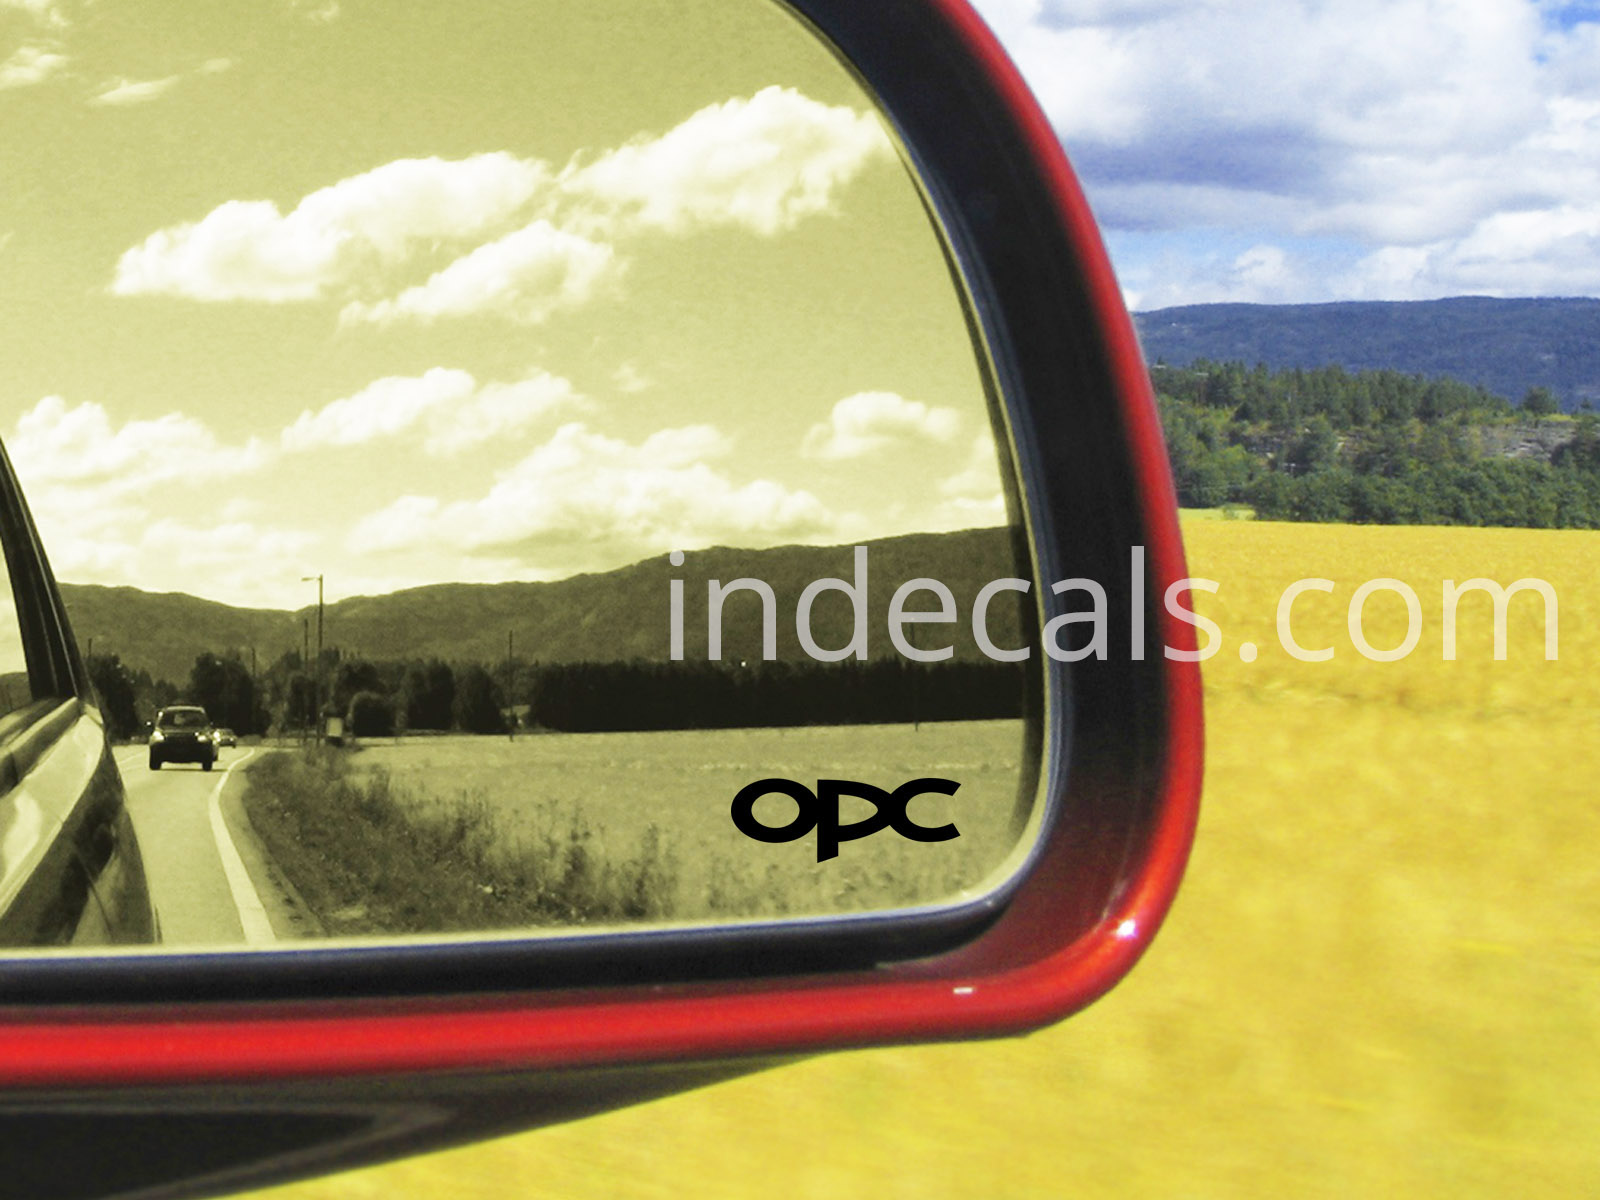 3 x Opel OPC Stickers for Mirror Glass - Black